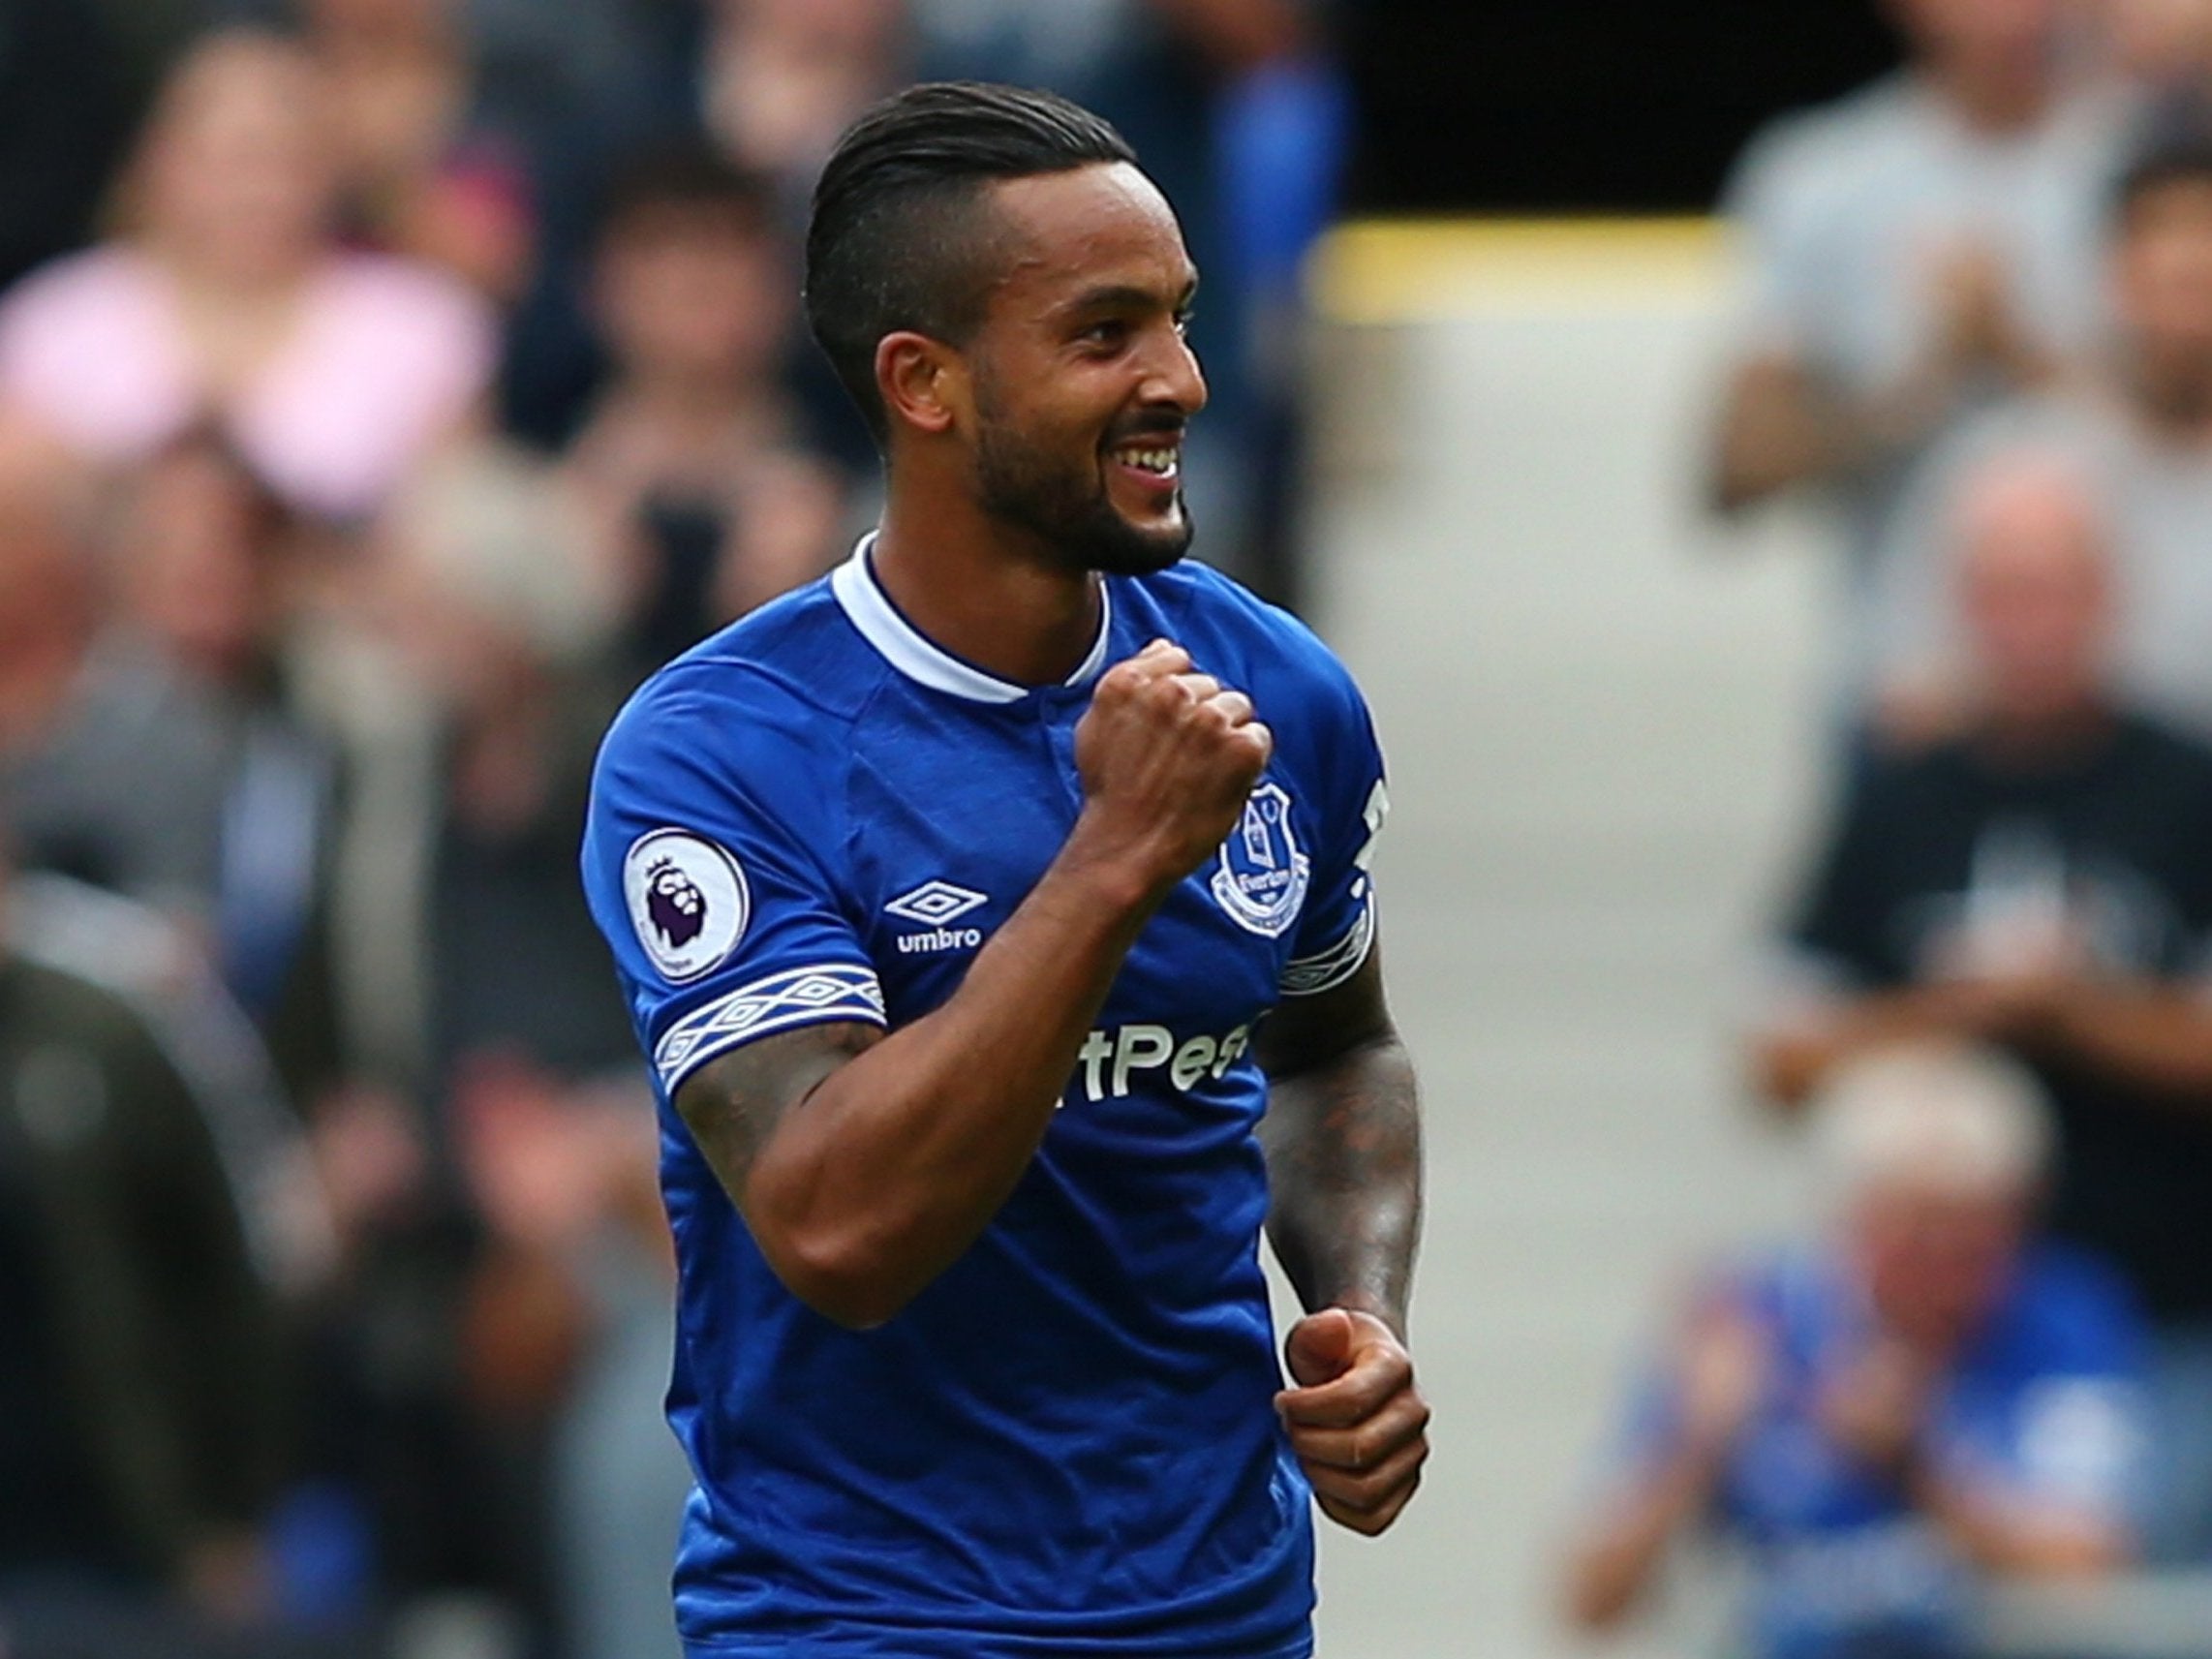 Theo Walcott opened the scoring for Everton as they handed manager Marco Silva his first win